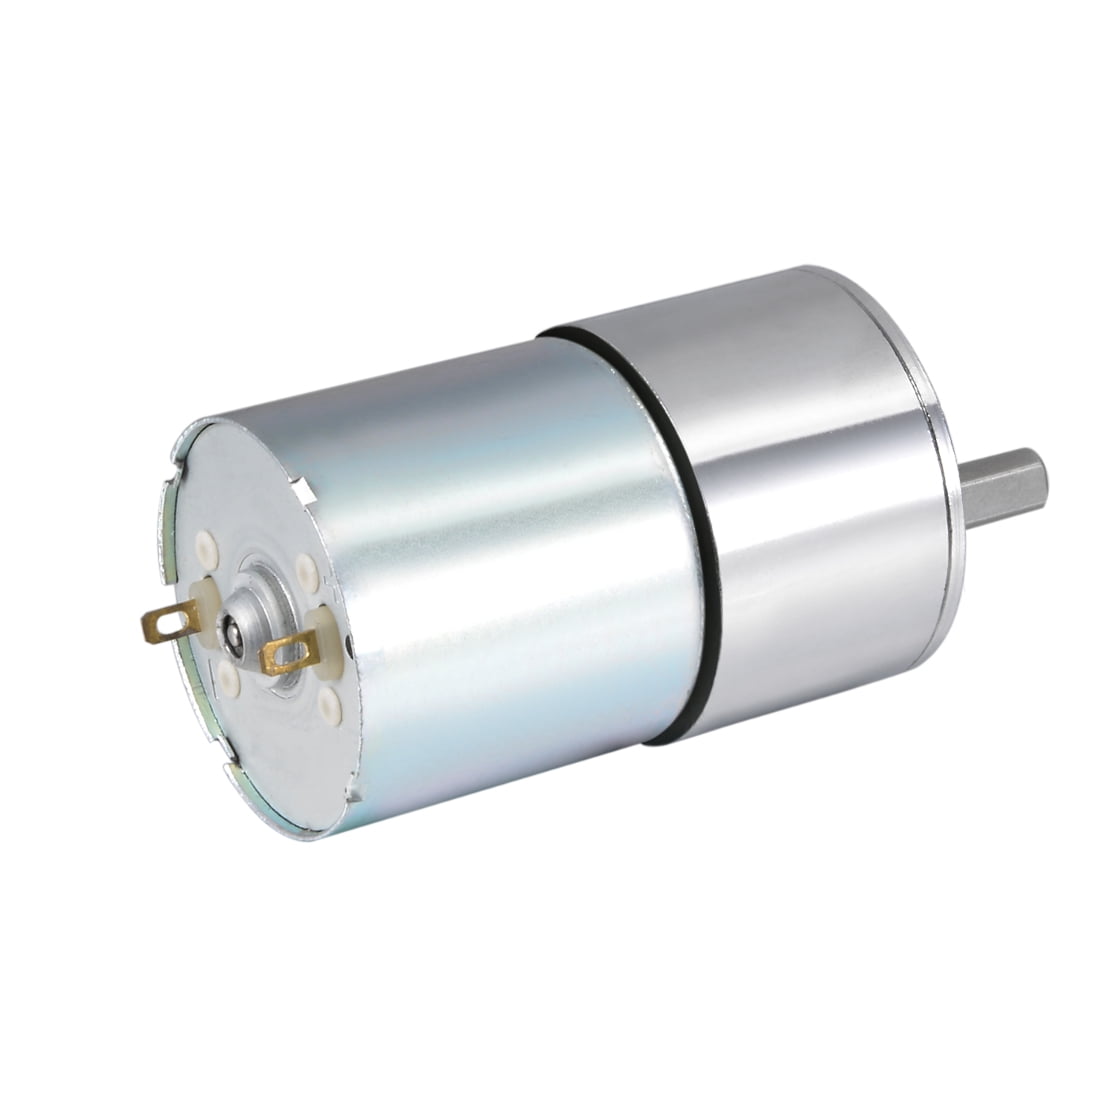 24V DC 200 RPM High torque gearmotor Electrical reduction Gearbox Eccentric output shaft 